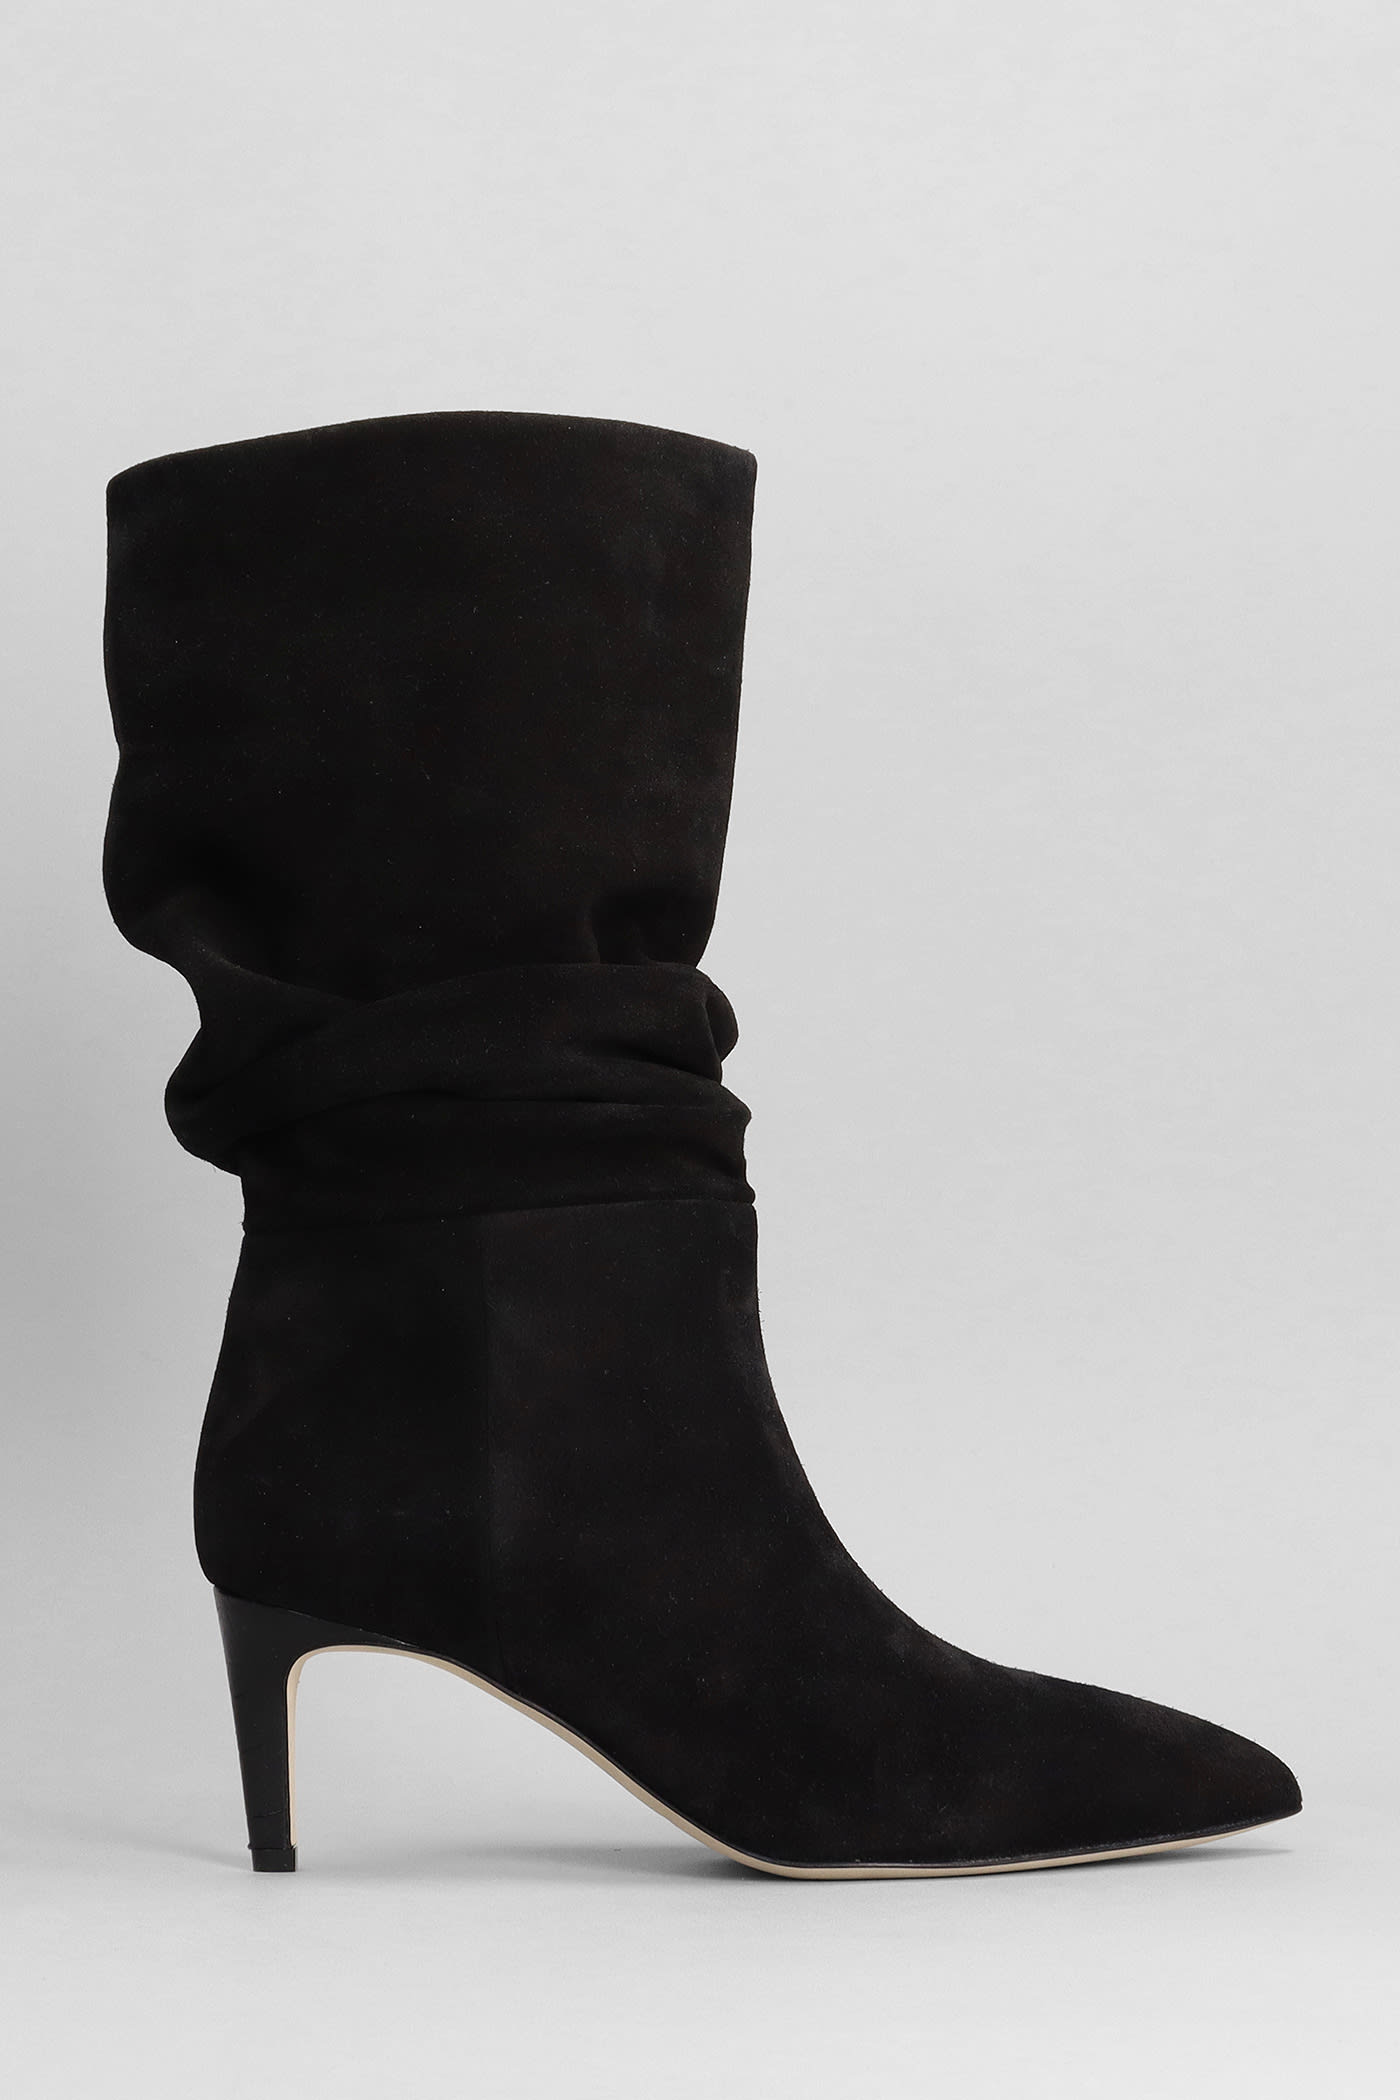 PARIS TEXAS HIGH HEELS ANKLE BOOTS IN BLACK SUEDE